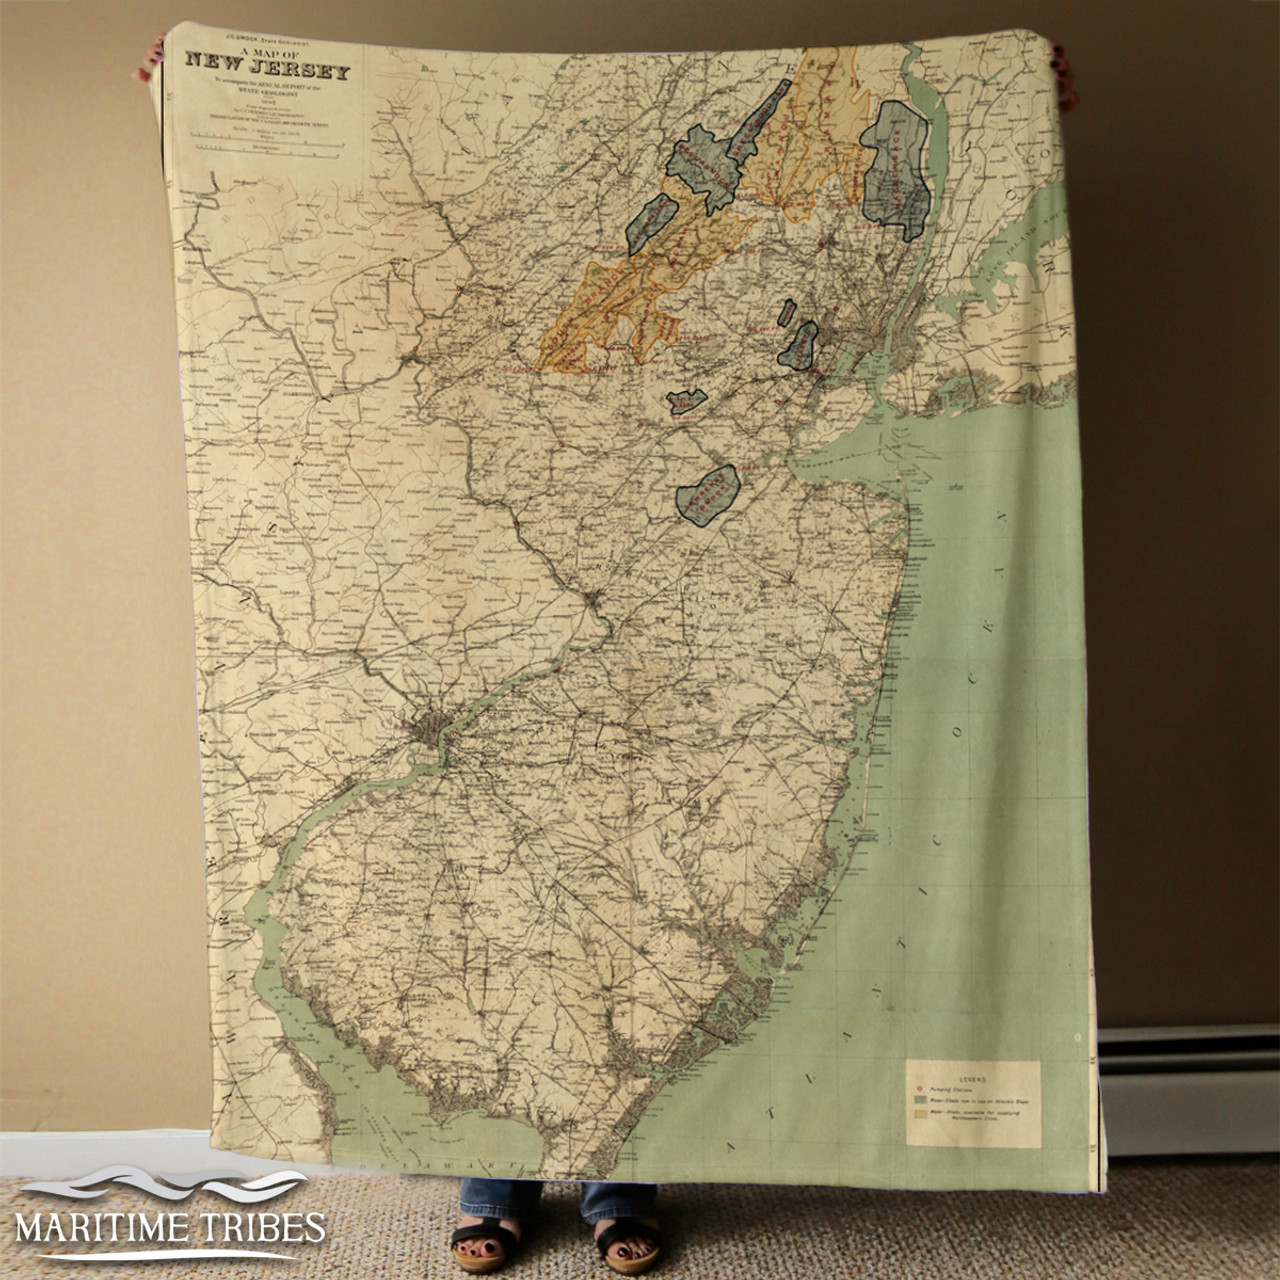 Nautical Chart Blanket – New Jersey State